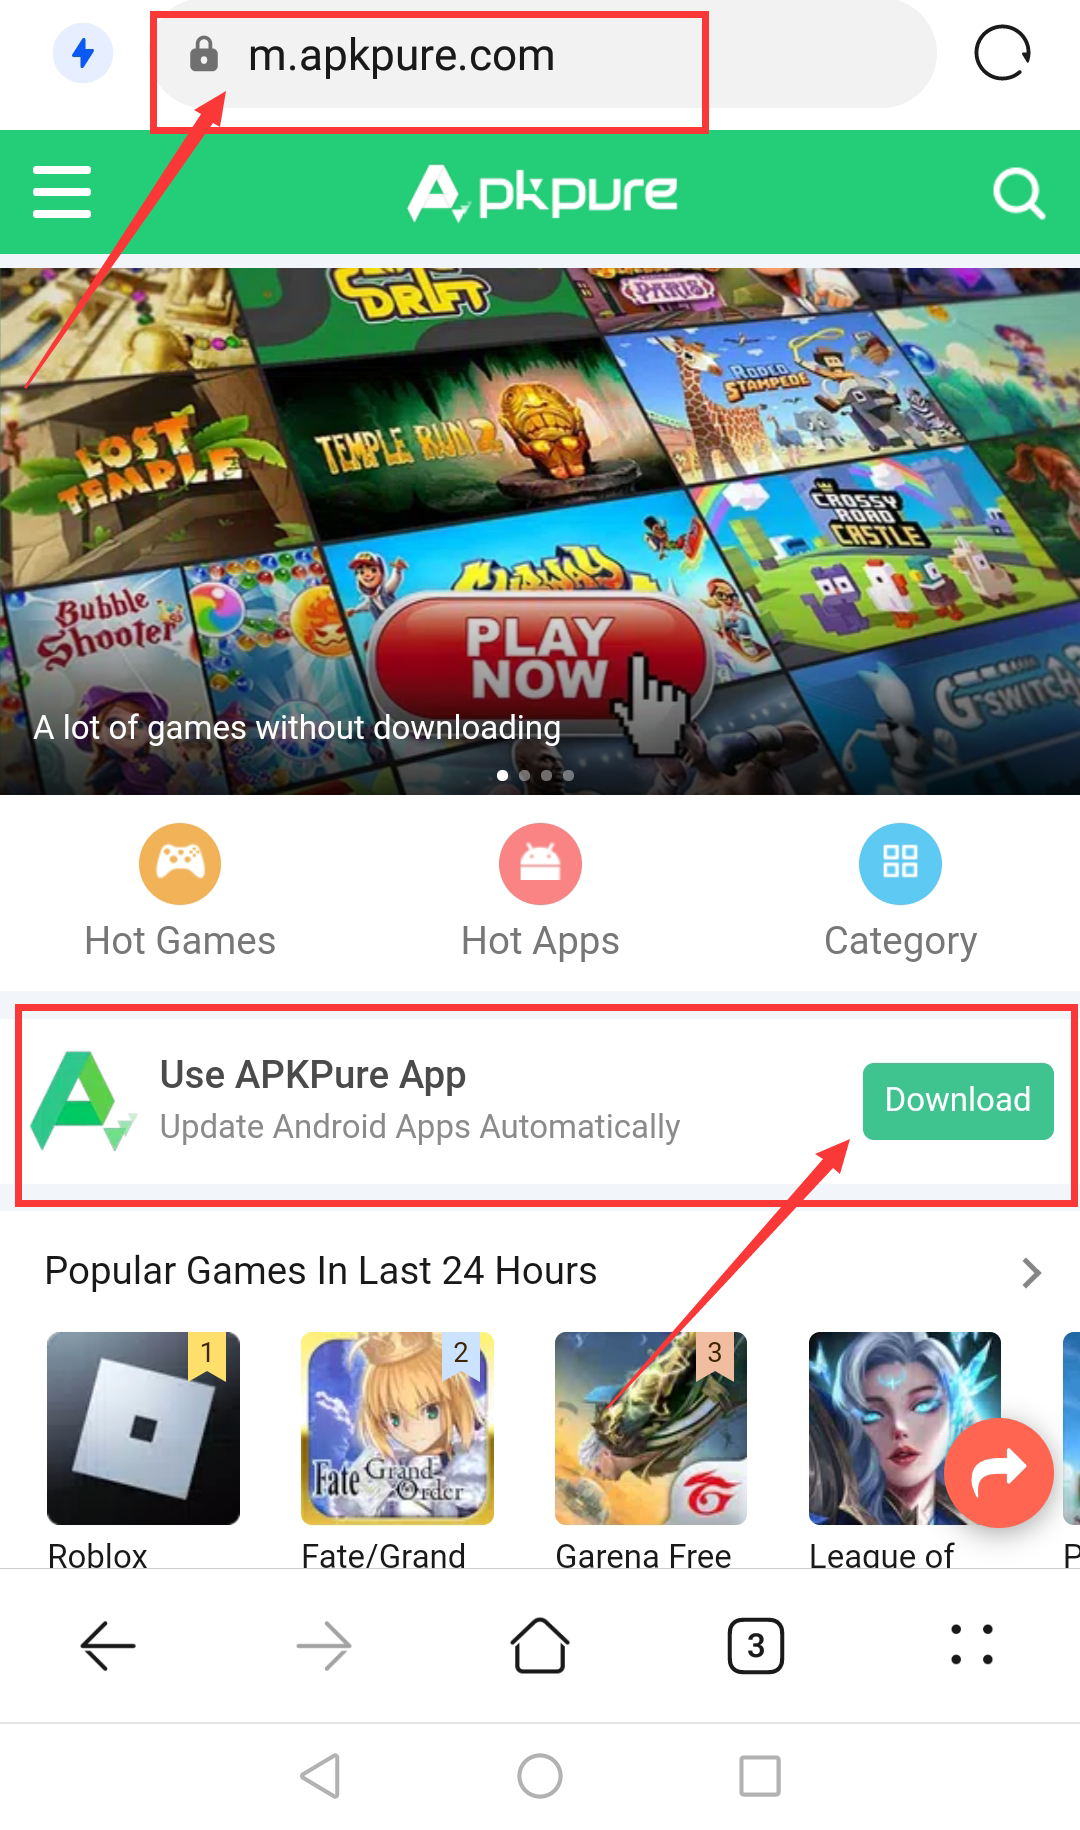 Play Android Games In Play Store Without Downloading Them, Here Is How